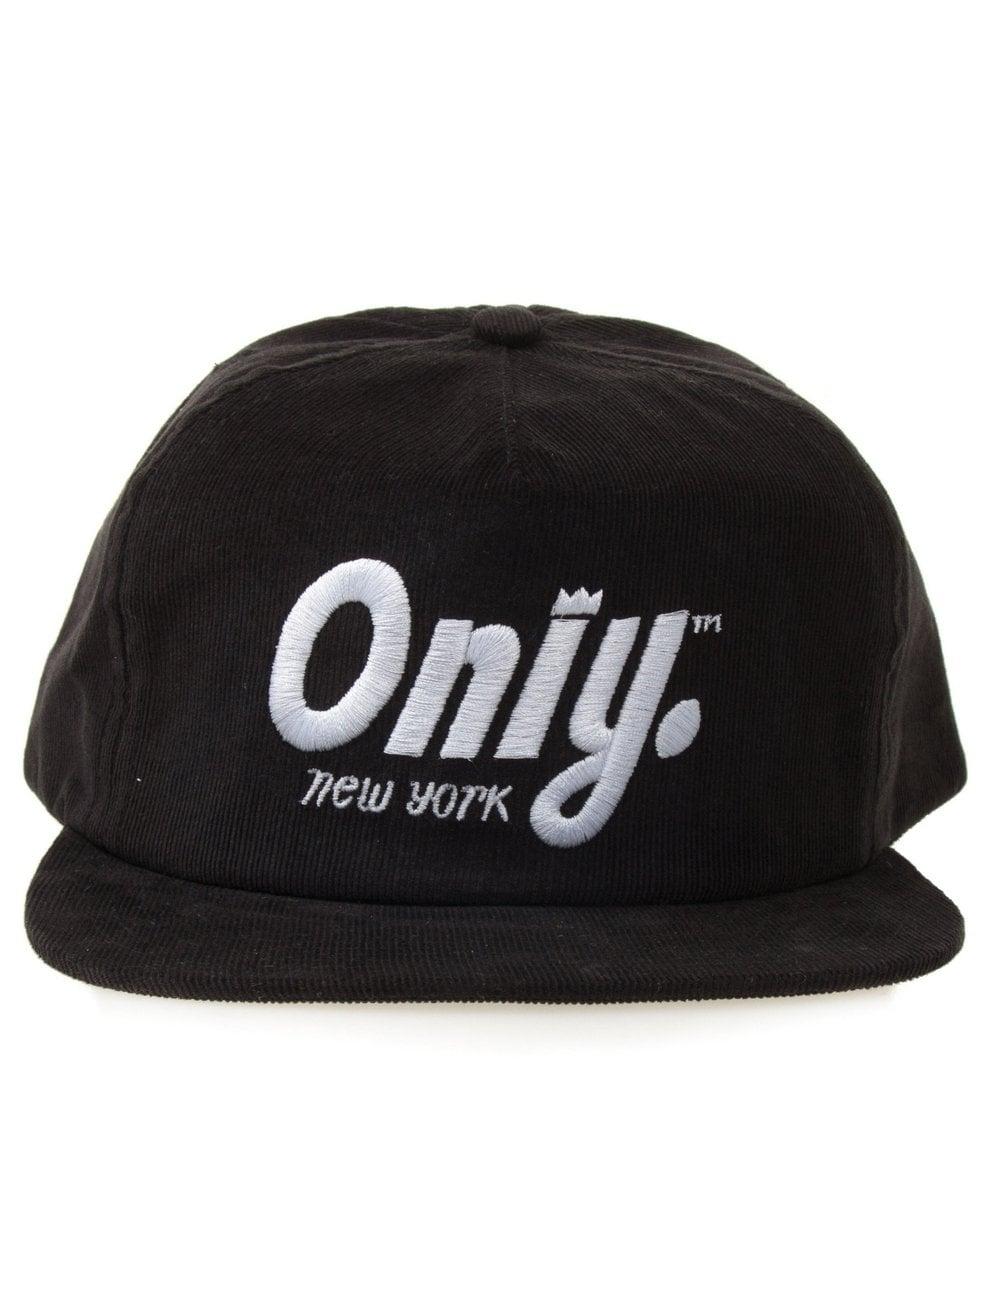 New York Crown Logo - Only NY Clothing Crown Logo Snapback - Black - Accessories from Fat ...